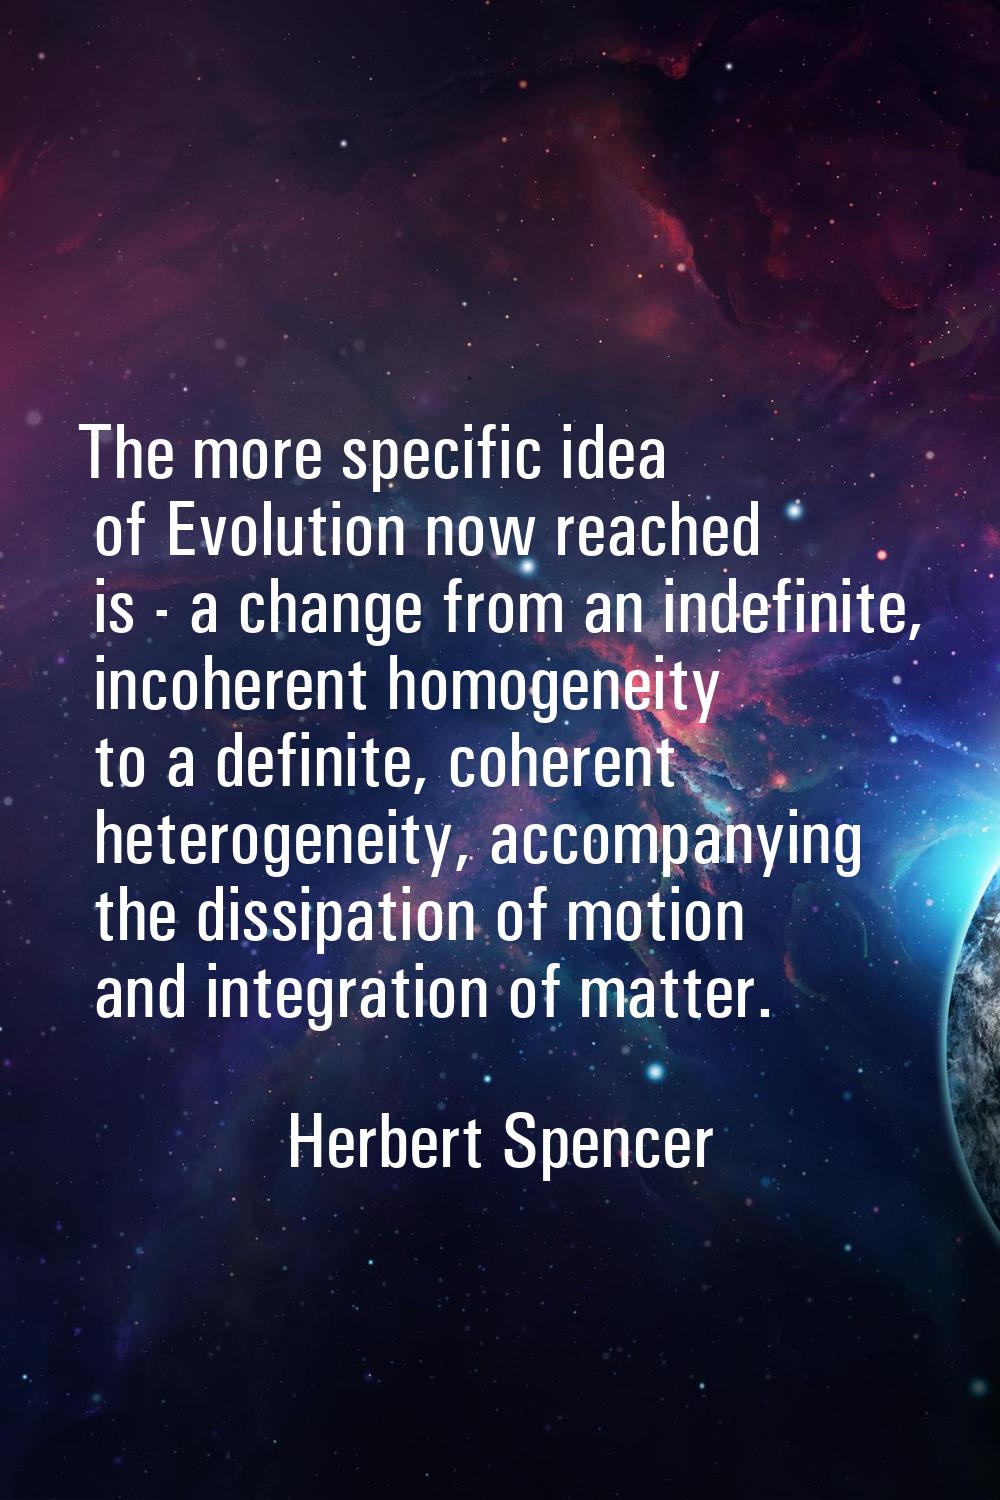 The more specific idea of Evolution now reached is - a change from an indefinite, incoherent homoge